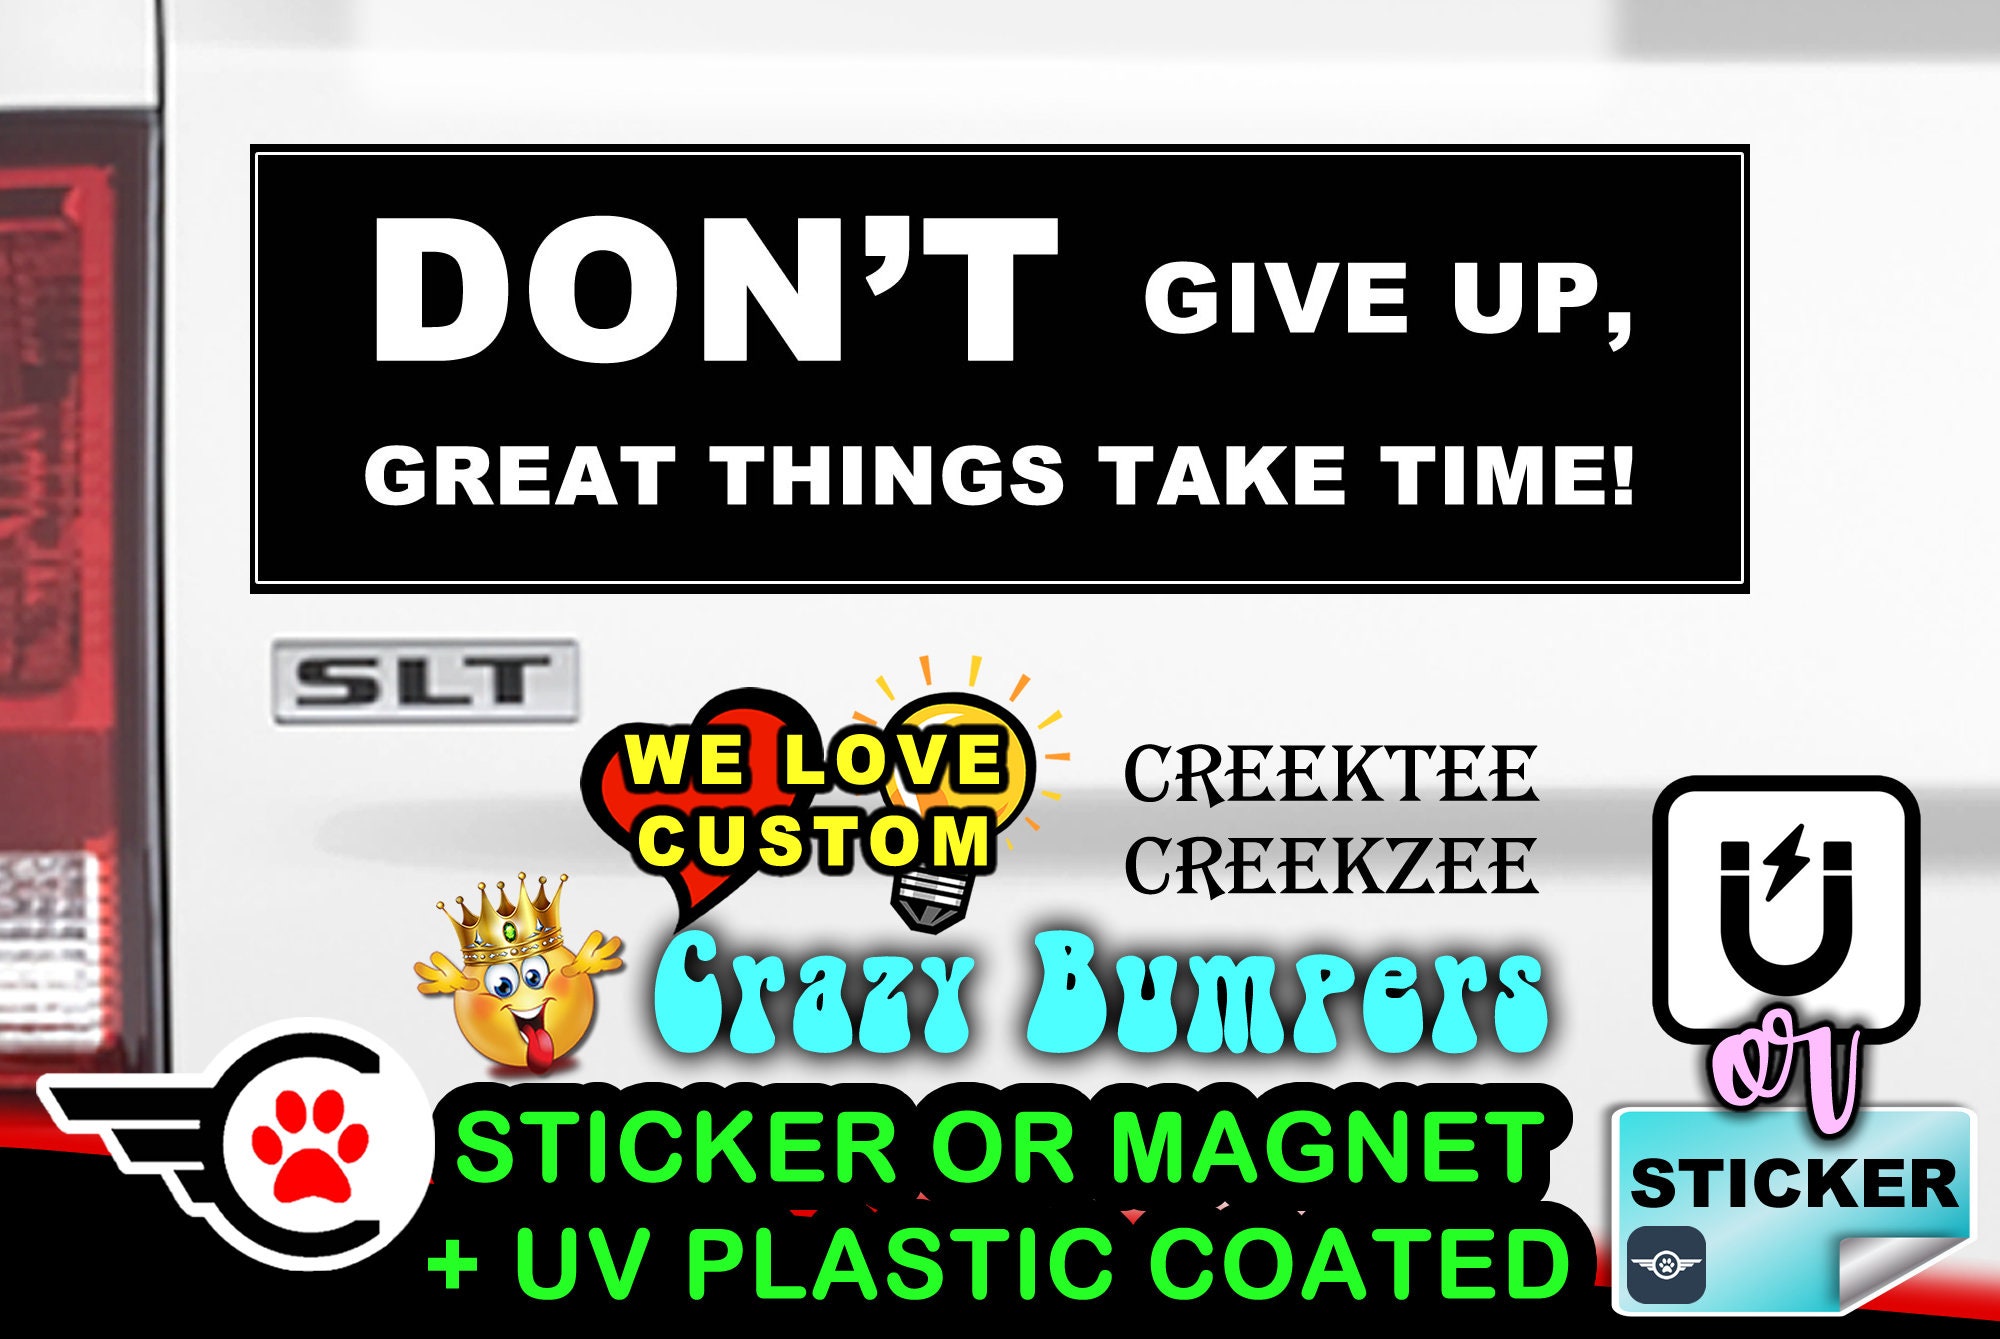 Don't Give Up Great Things Take Time! - Bumper Sticker or Magnet sizes 4